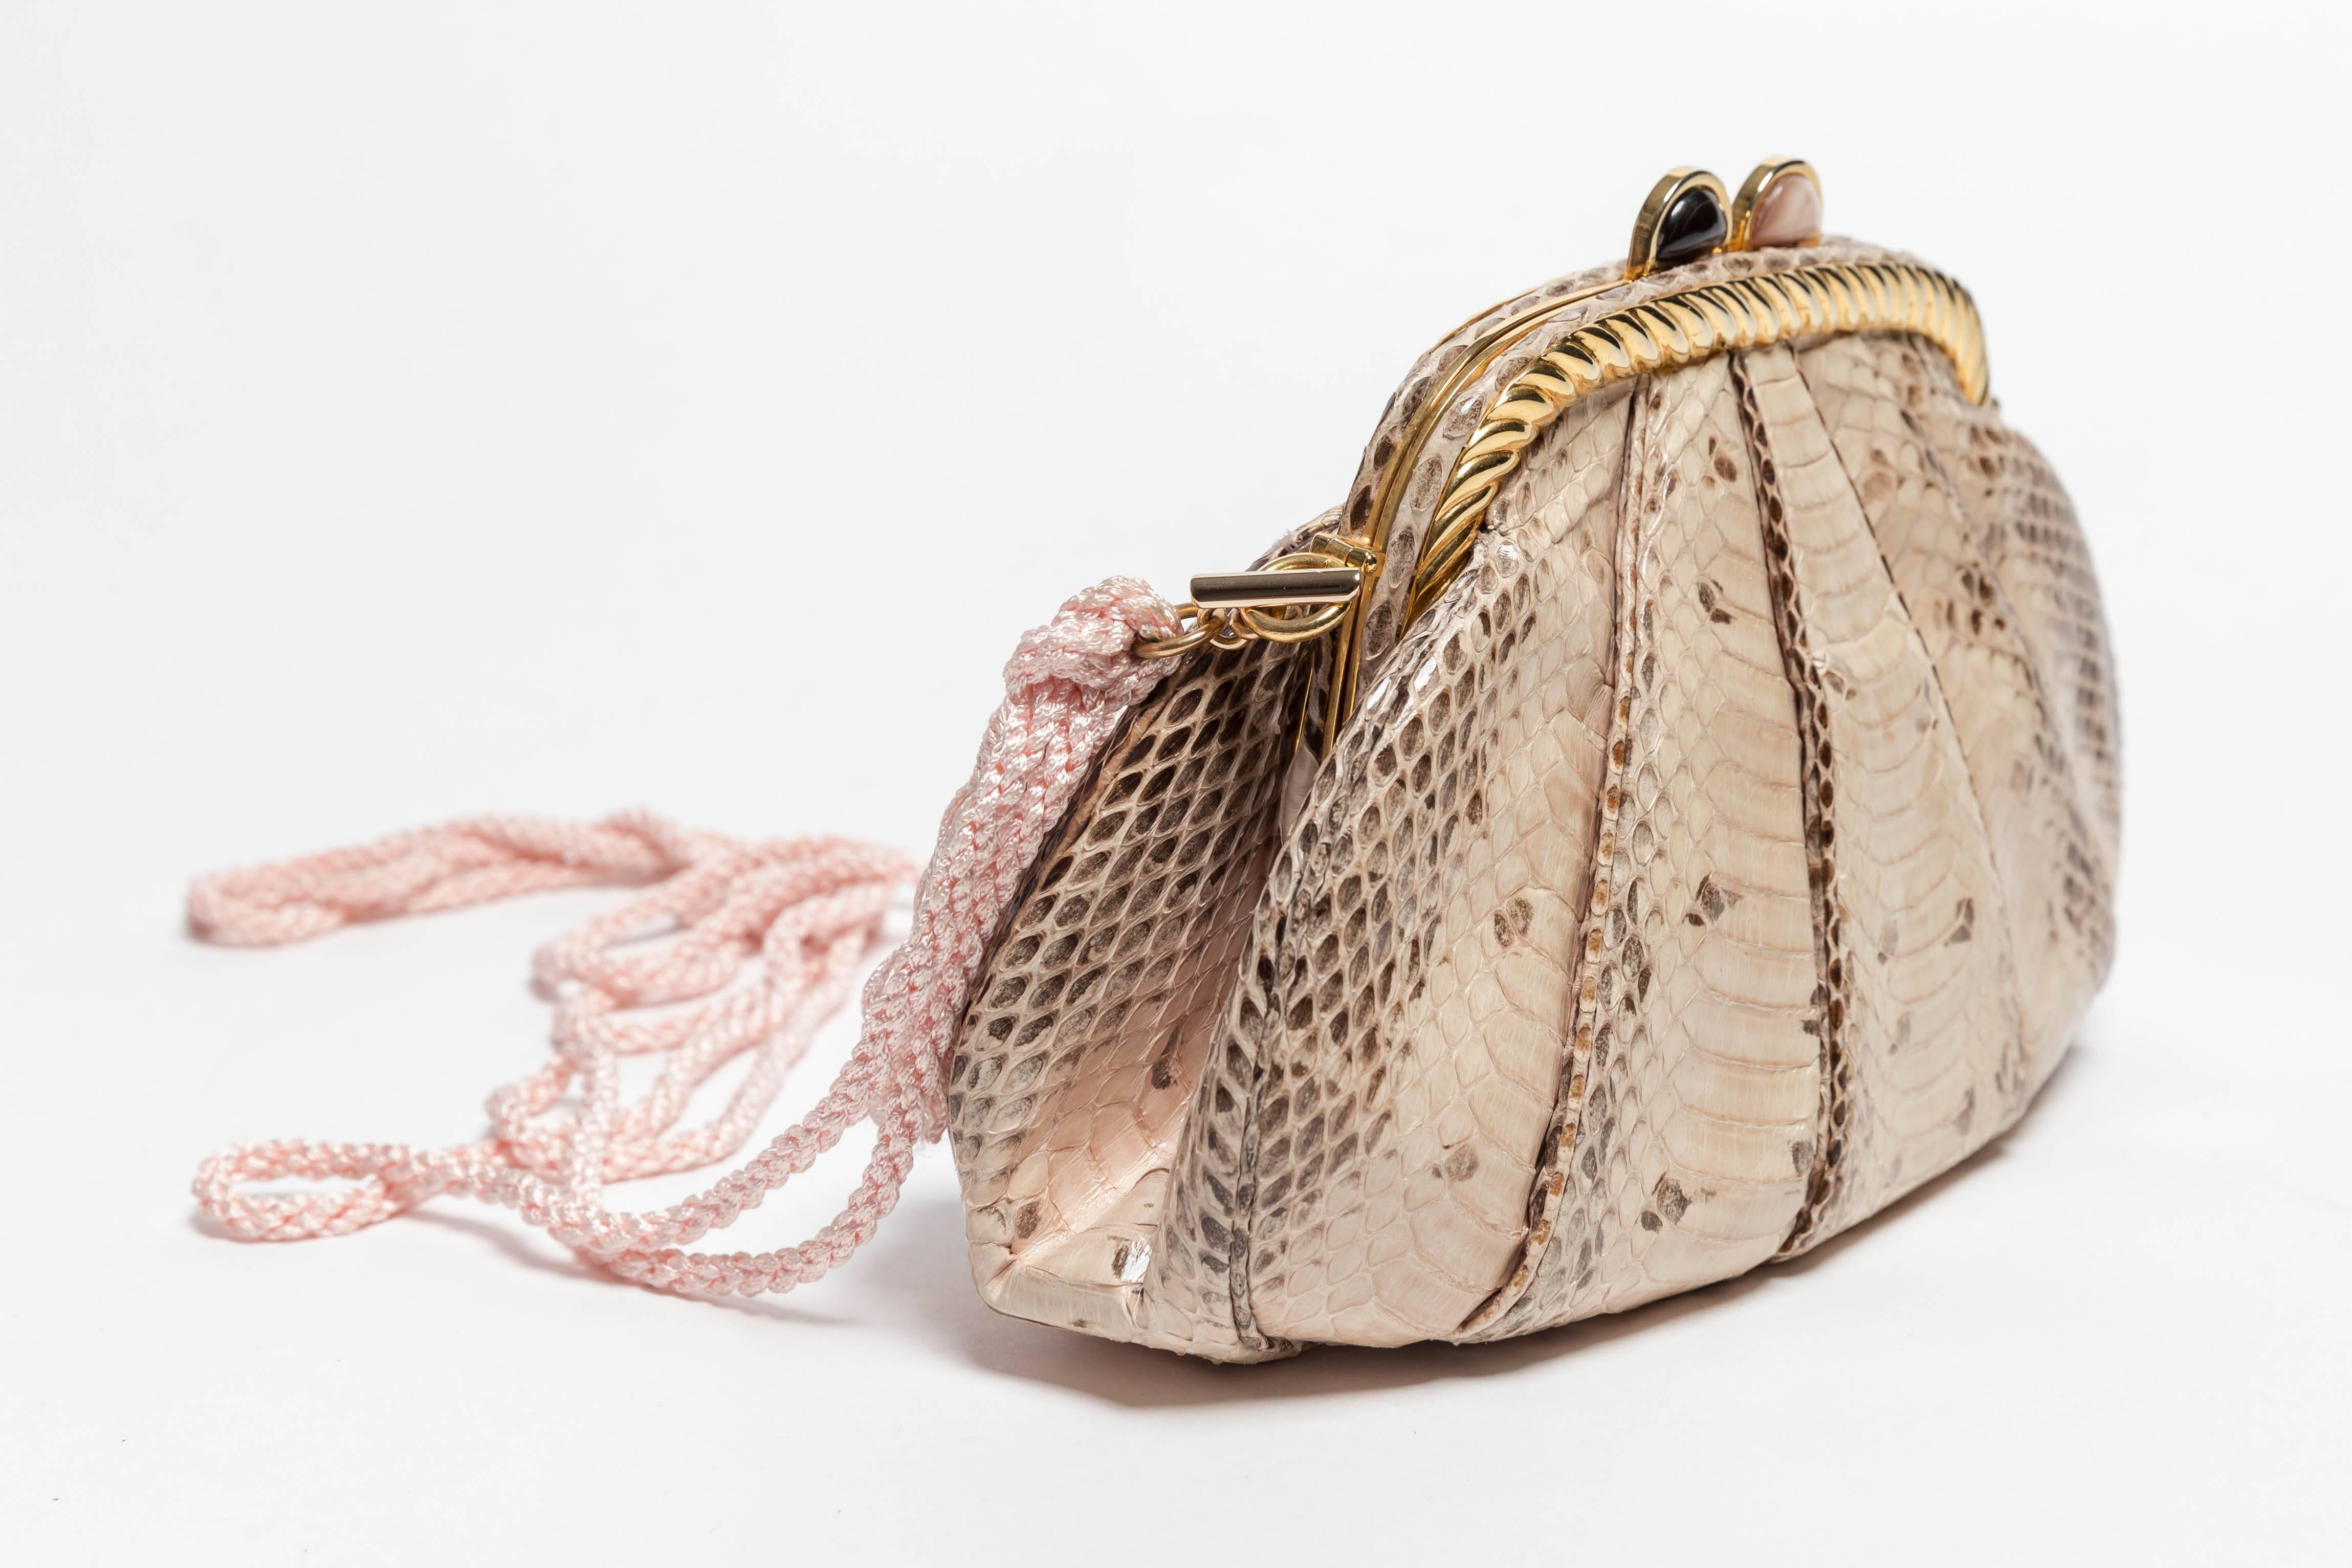 Very pretty Judith Leiber python clutch with removable silk shoulder strap.
Gold trim with semiprecious stone embellishment.
Includes Judith Leiber mirror and change purse.
Condition is excellent.